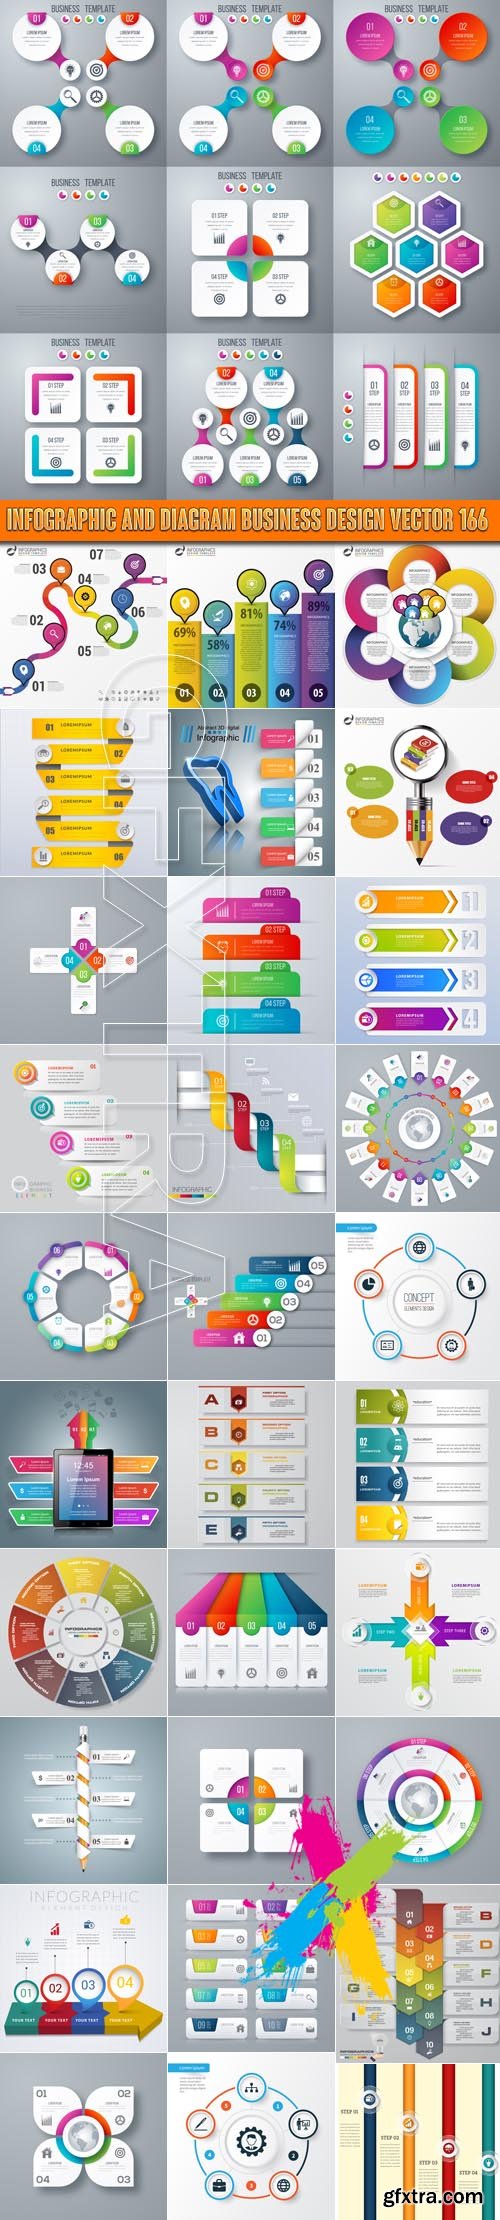 Infographic and diagram business design vector 166